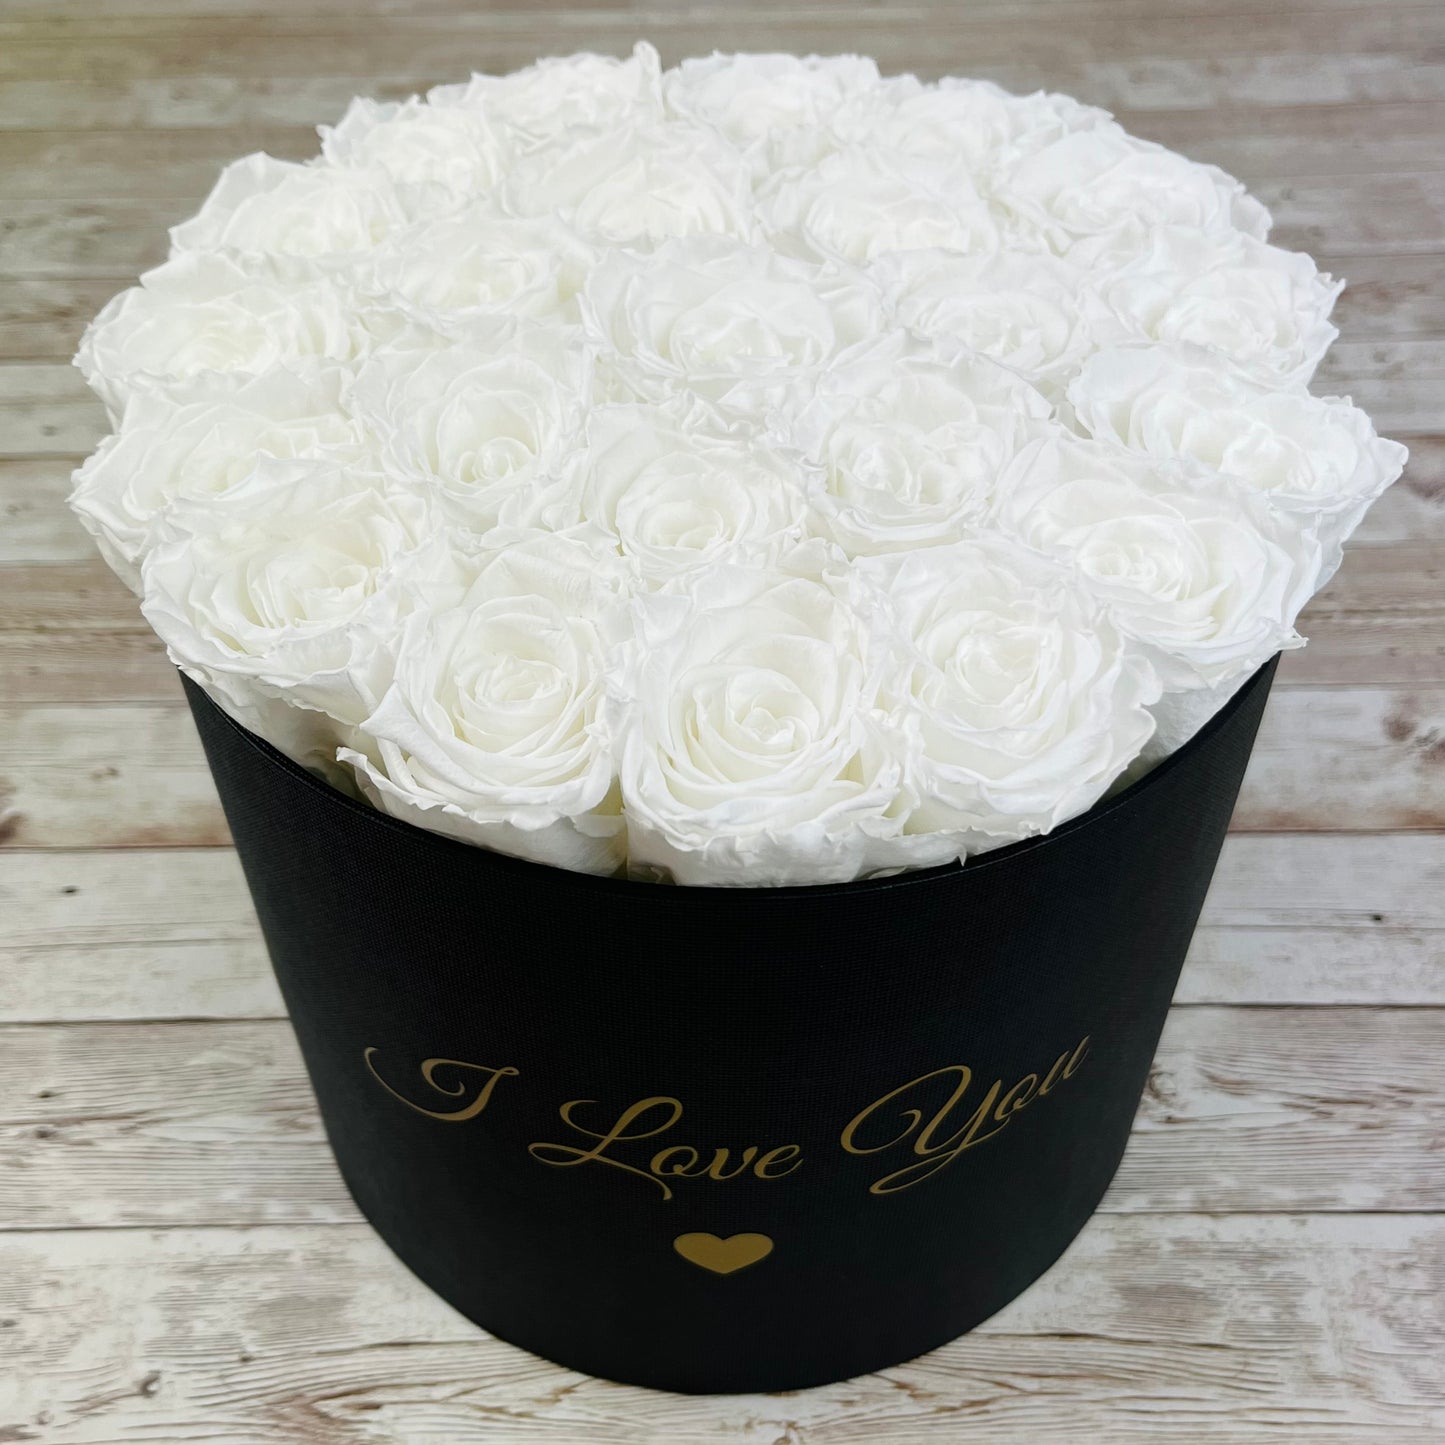 Large Round Infinity Rose Box - White Eternal Roses - One Year Roses - Roses in a box - Rose Colours divider-Angelic White